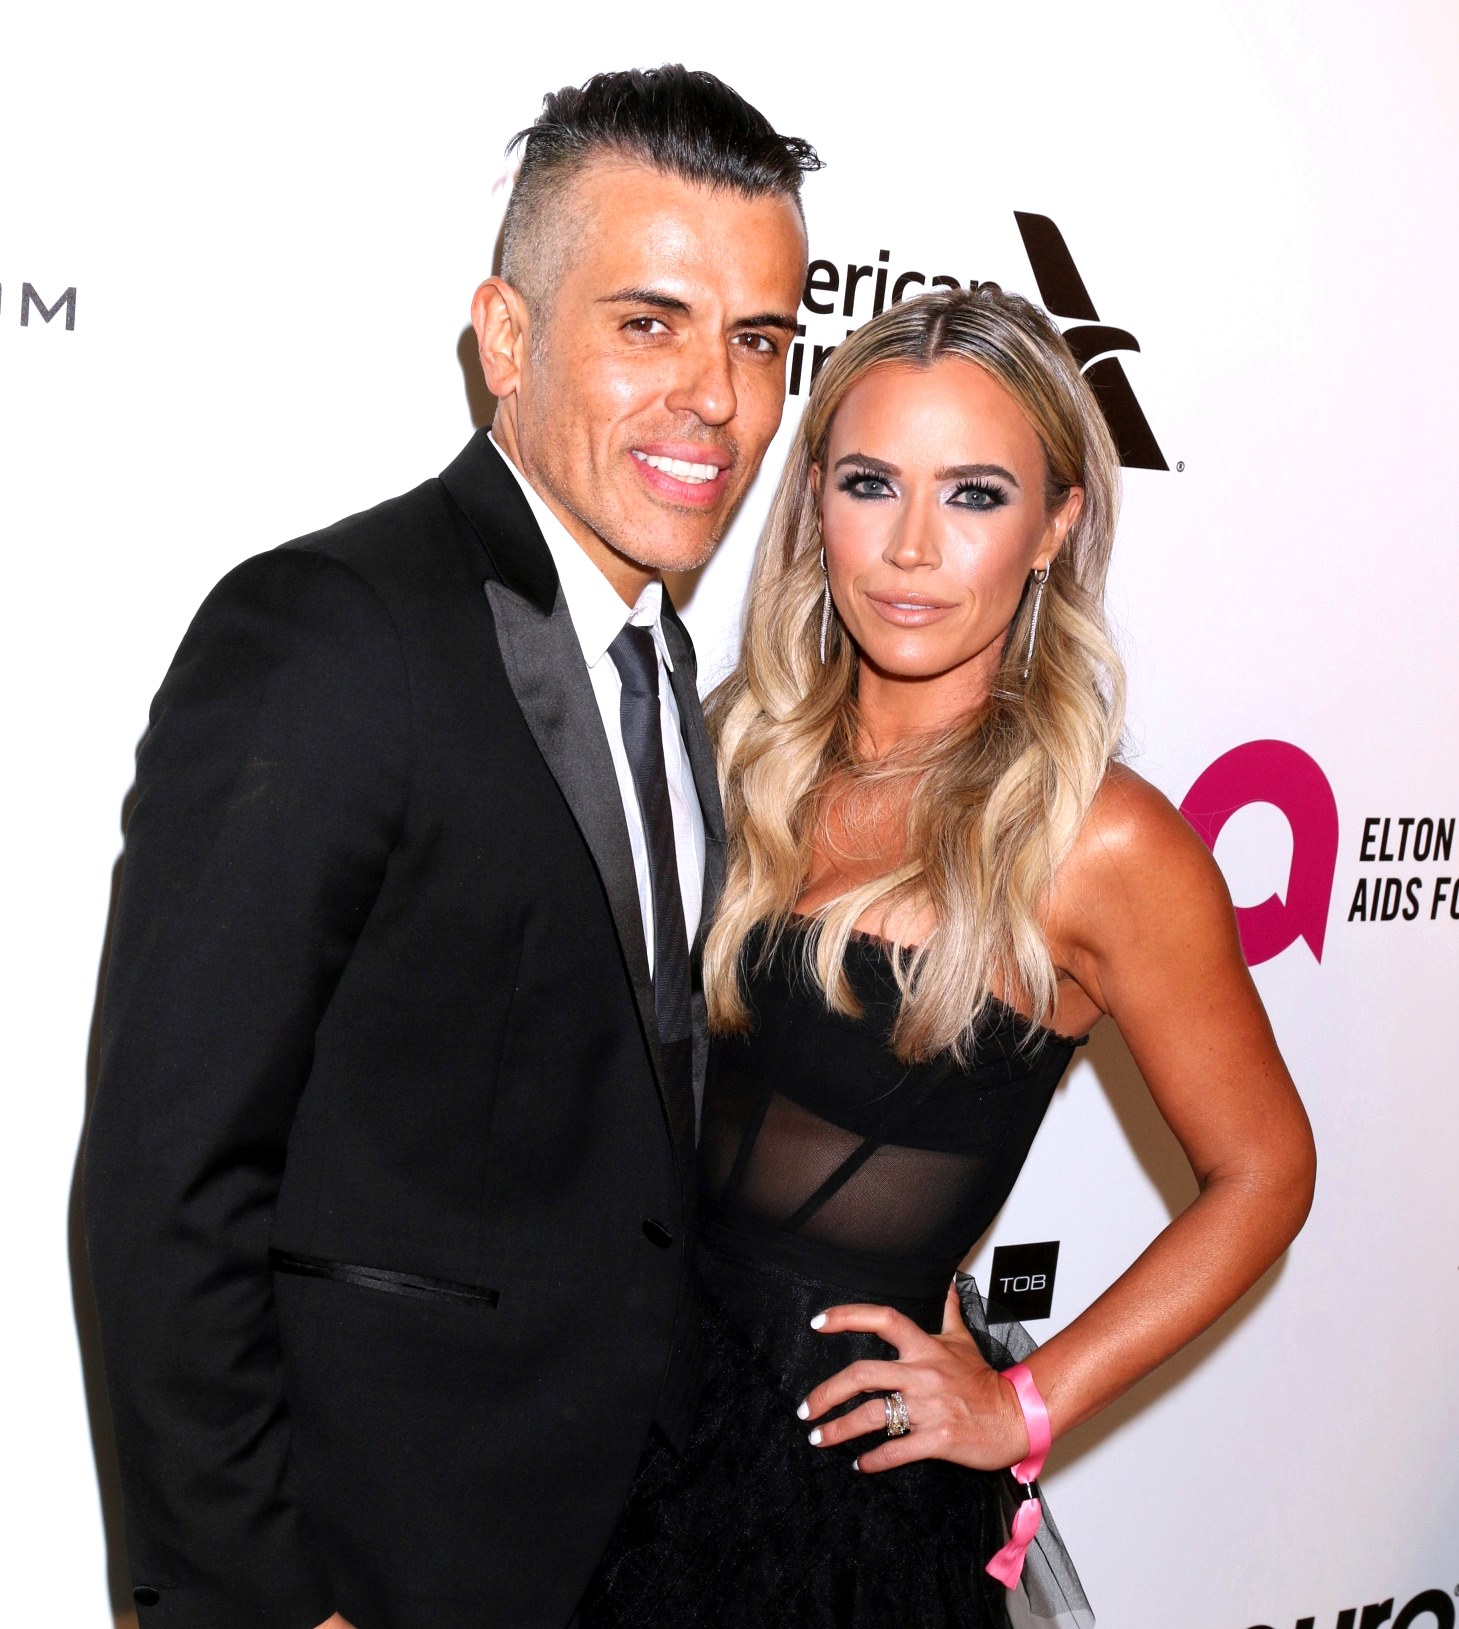 RHOBH Star Teddi Mellencamp Reveals She's Pregnant! Expecting Her 3rd Child With Husband Edwin Arroyave, Did She Go Through IVF?